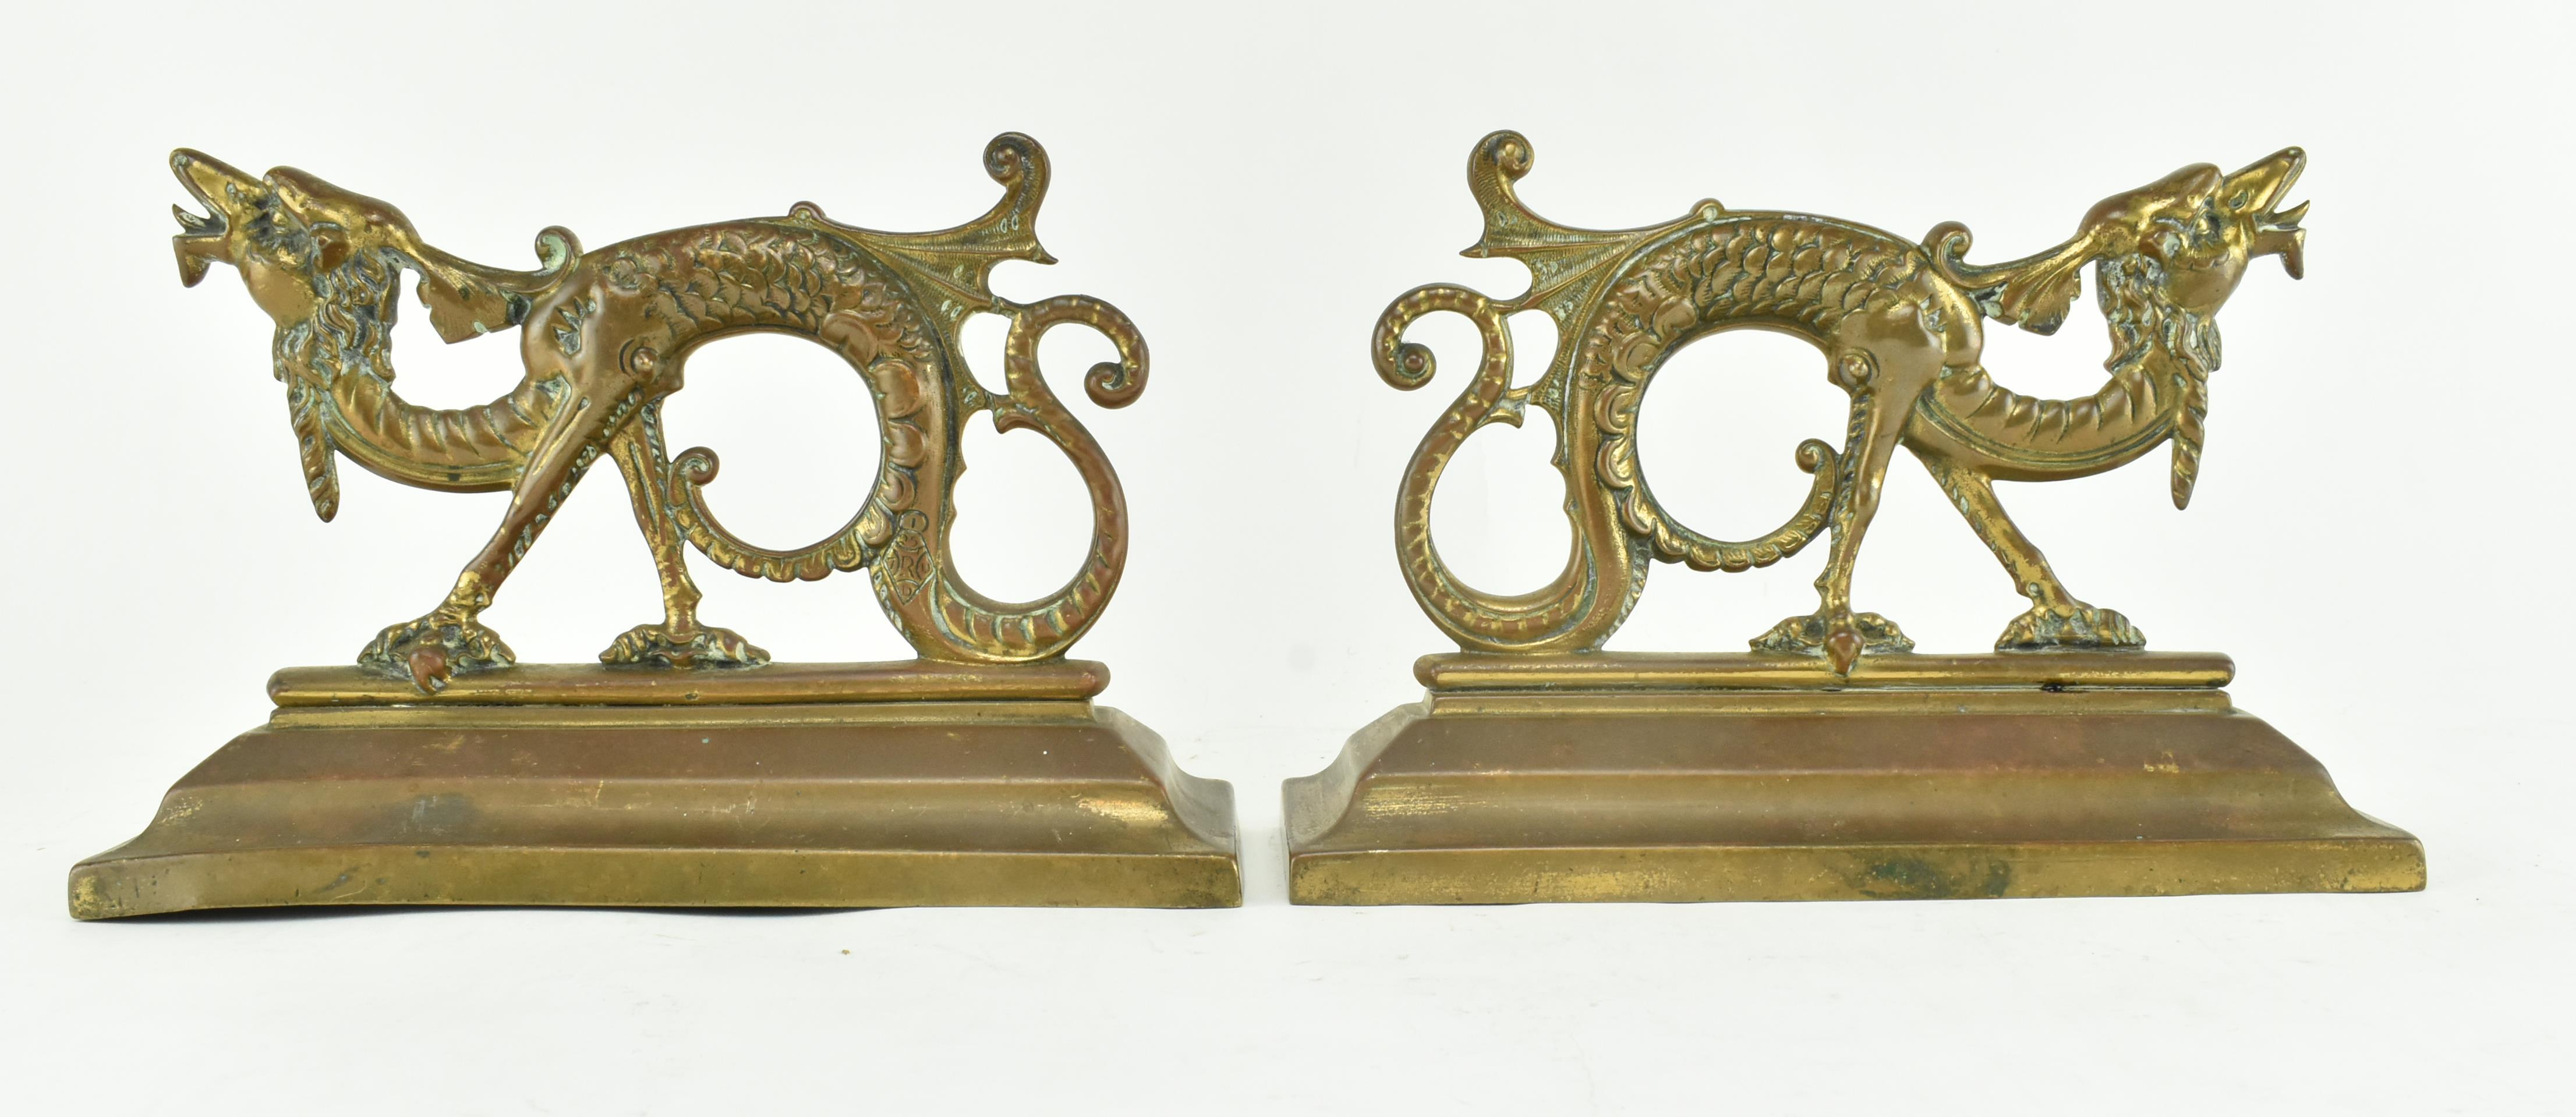 PAIR OF VICTORIAN BRASS DRAGON FIRE DOGS - Image 4 of 5